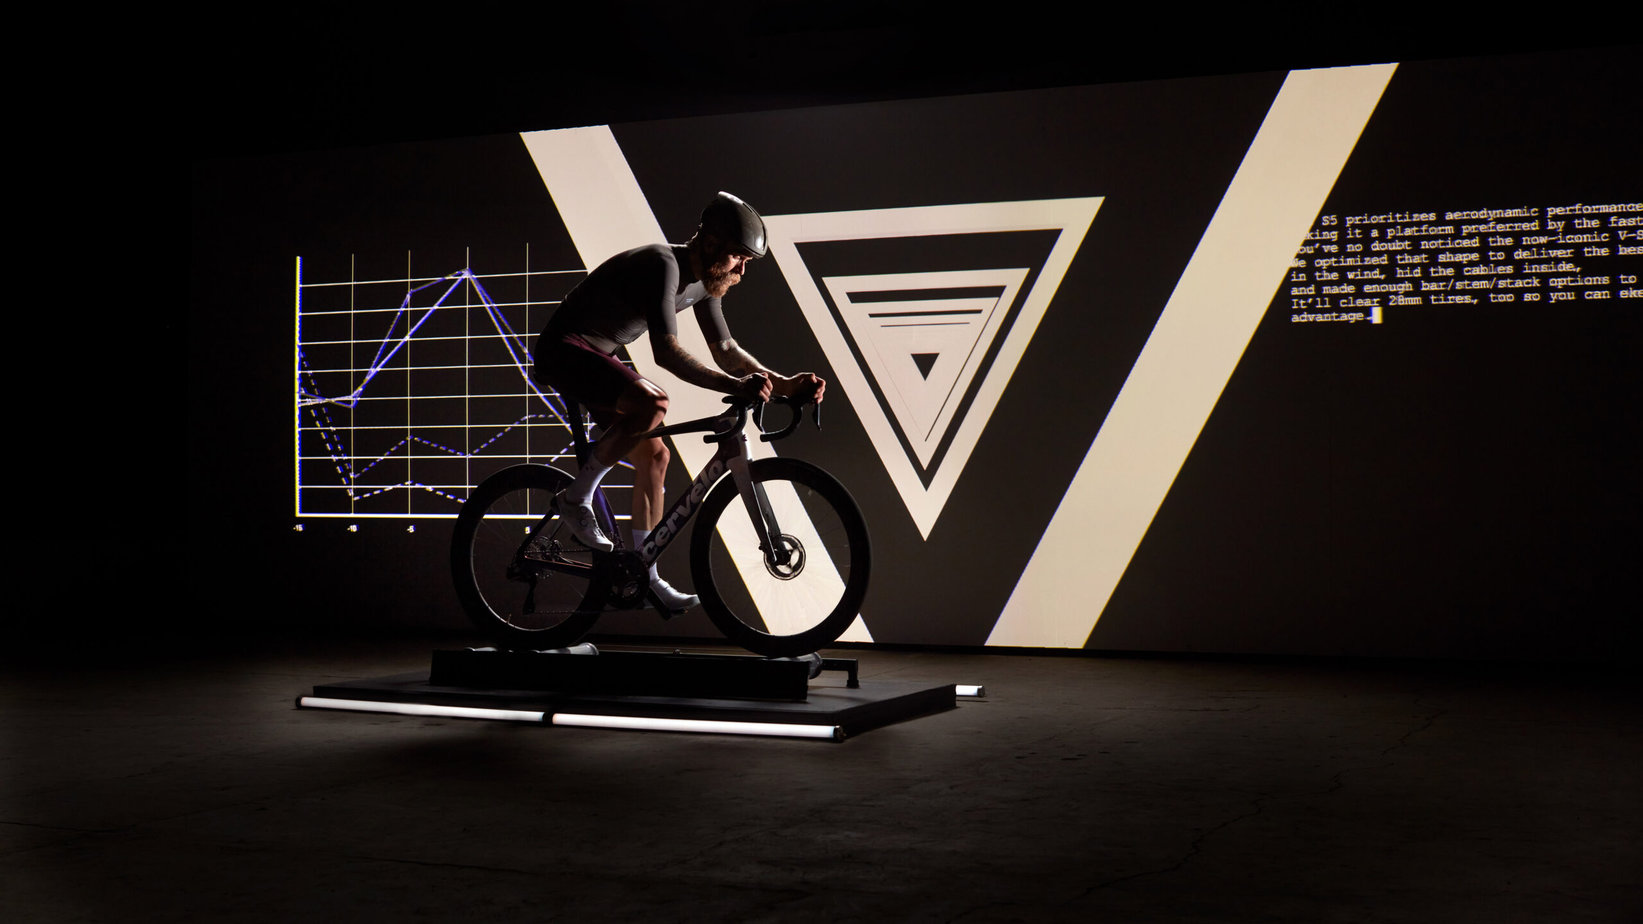 What a pleasure it was working alongside the cut media team on their latest campaign for Cervelo and the latest powerhouse of the road, the S5  In a blacked out warehouse projected onto a 20 foot screen the 3D models created by the inhouse team at Cut Media were exploding. I joined the team to help capture the final results of this raw and dynamic creative project.  